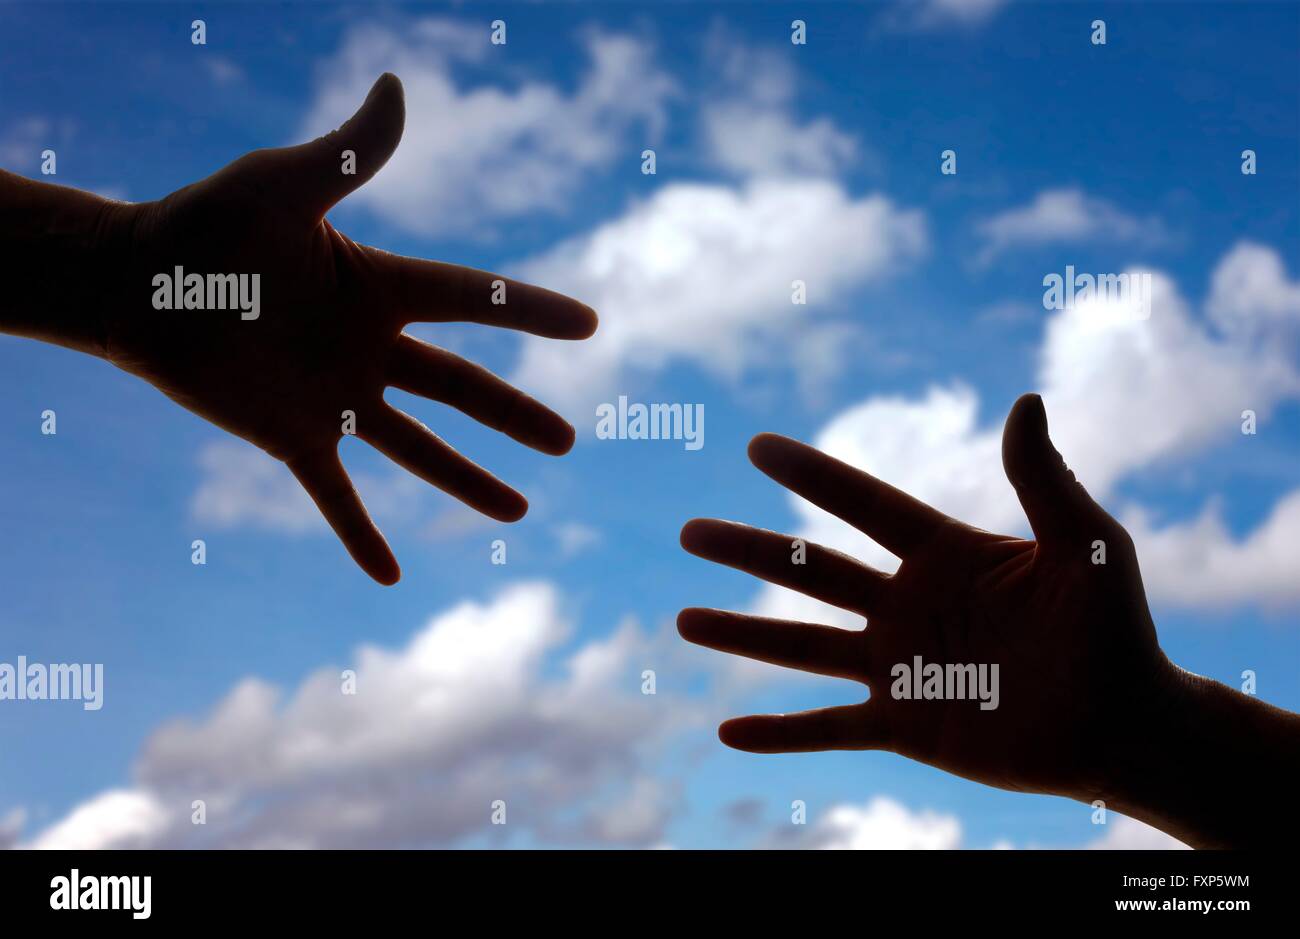 Silhouette of two hands reaching towards each other. Stock Photo